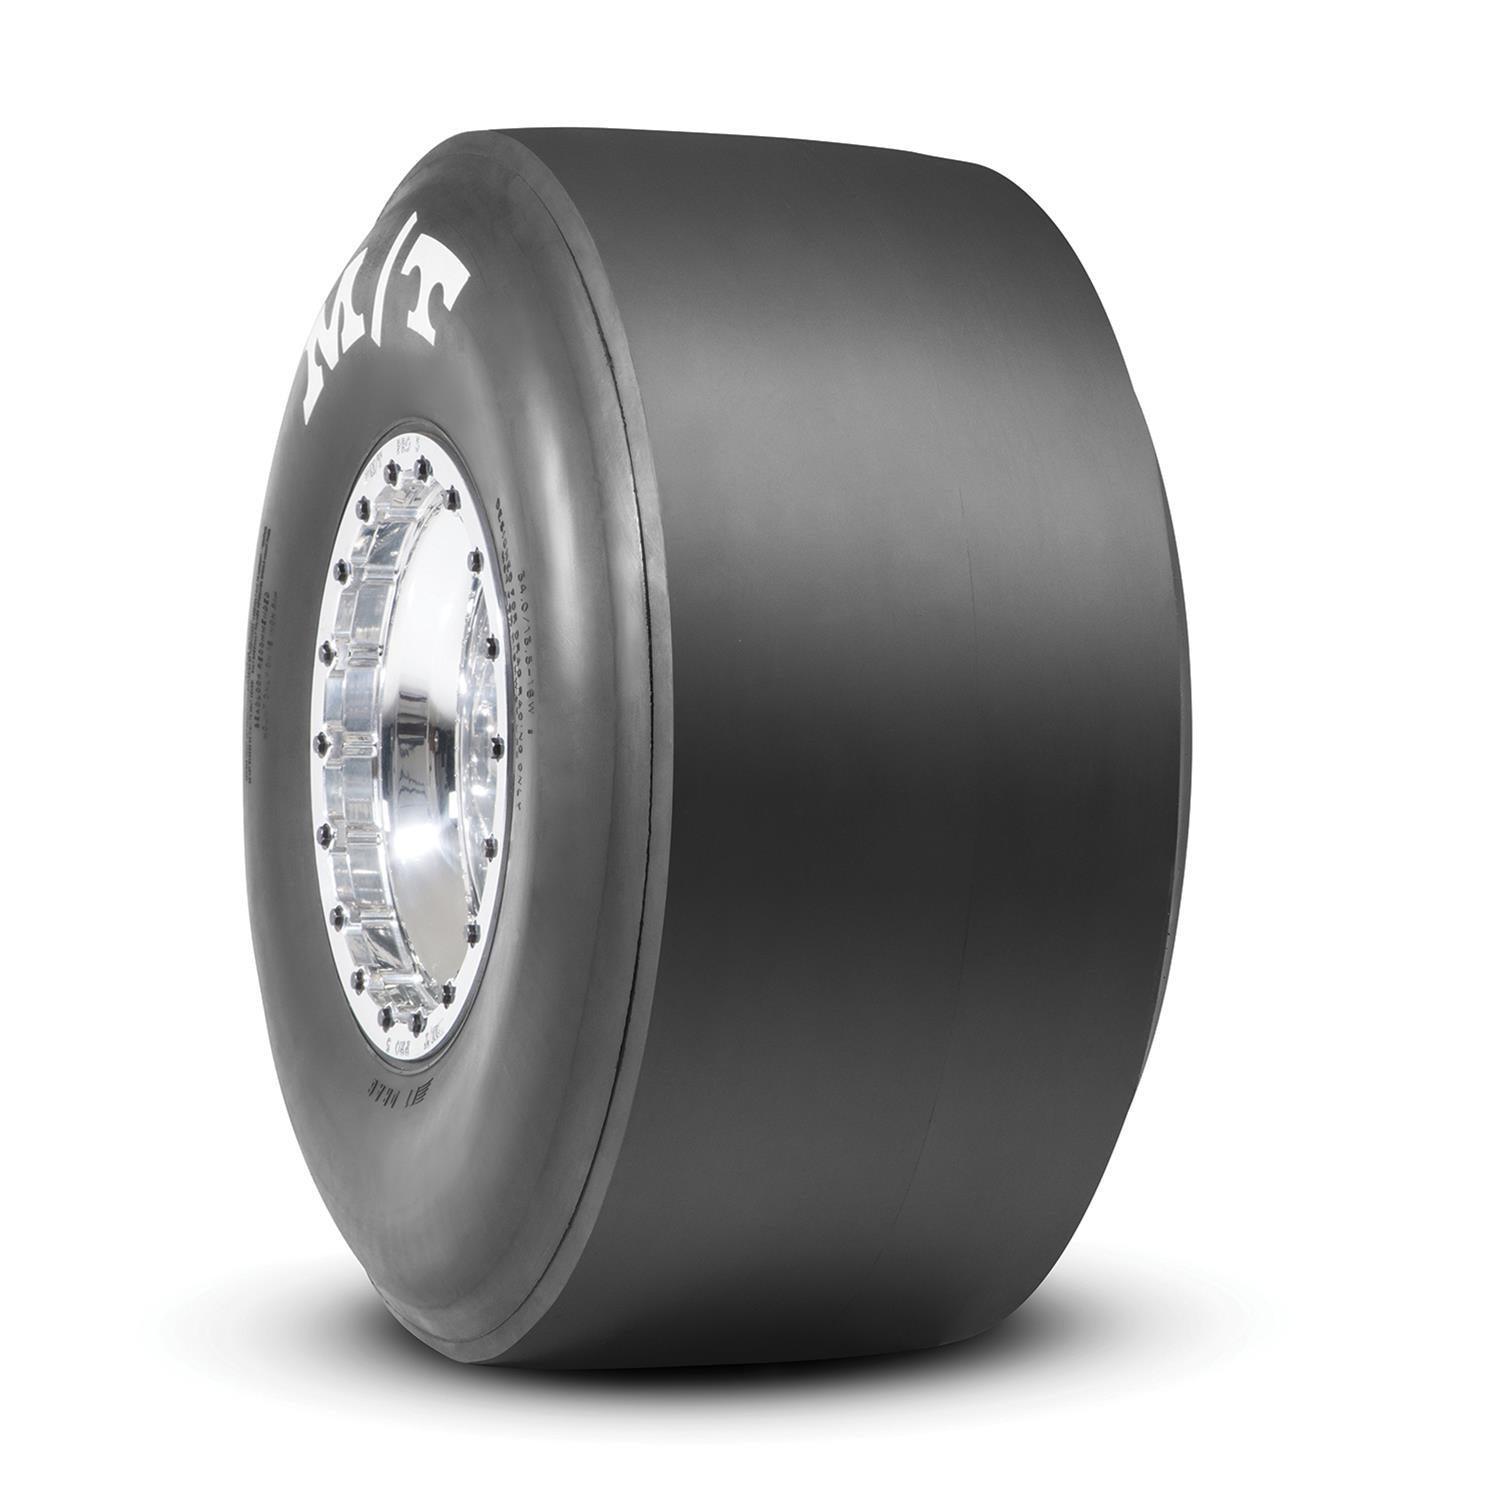 24.5/9-13 Import Drag Tire - Burlile Performance Products